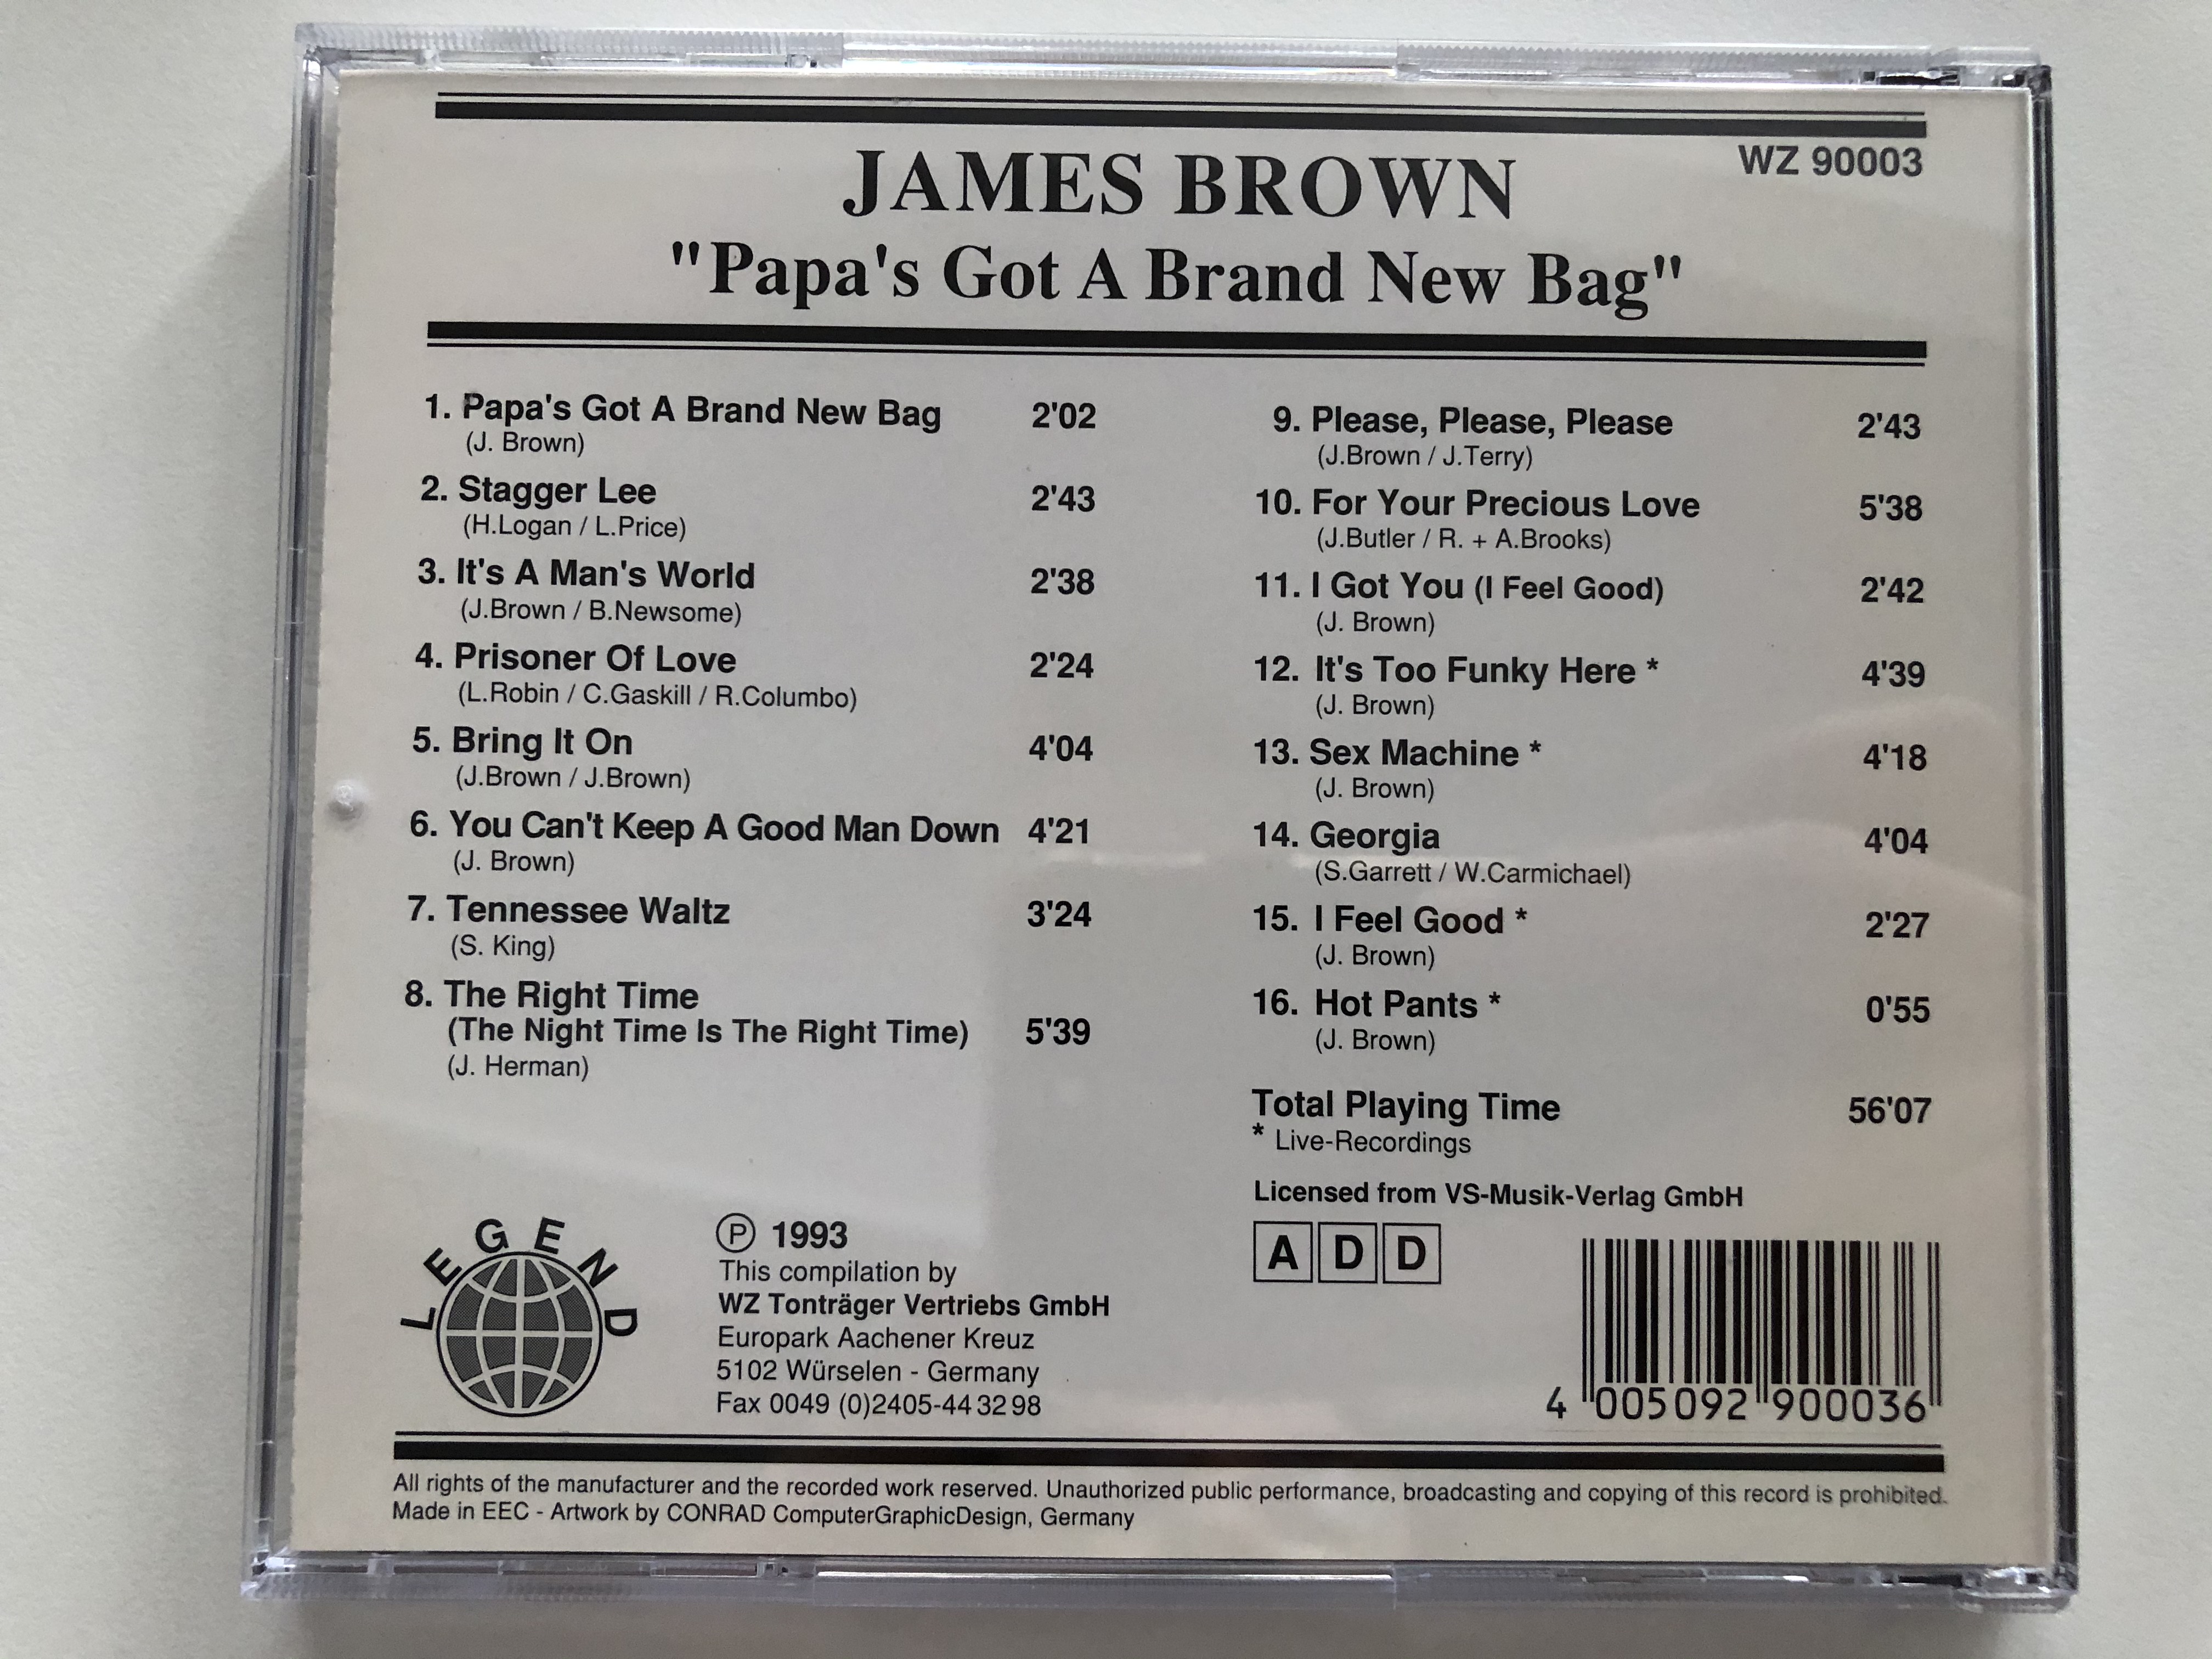 james-brown-papa-s-got-a-brand-new-bag-stagger-lee-it-s-a-man-s-world-tennessee-waltz-sex-machine-i-feel-good-and-many-more...-legend-audio-cd-1993-wz-90003-3-.jpg